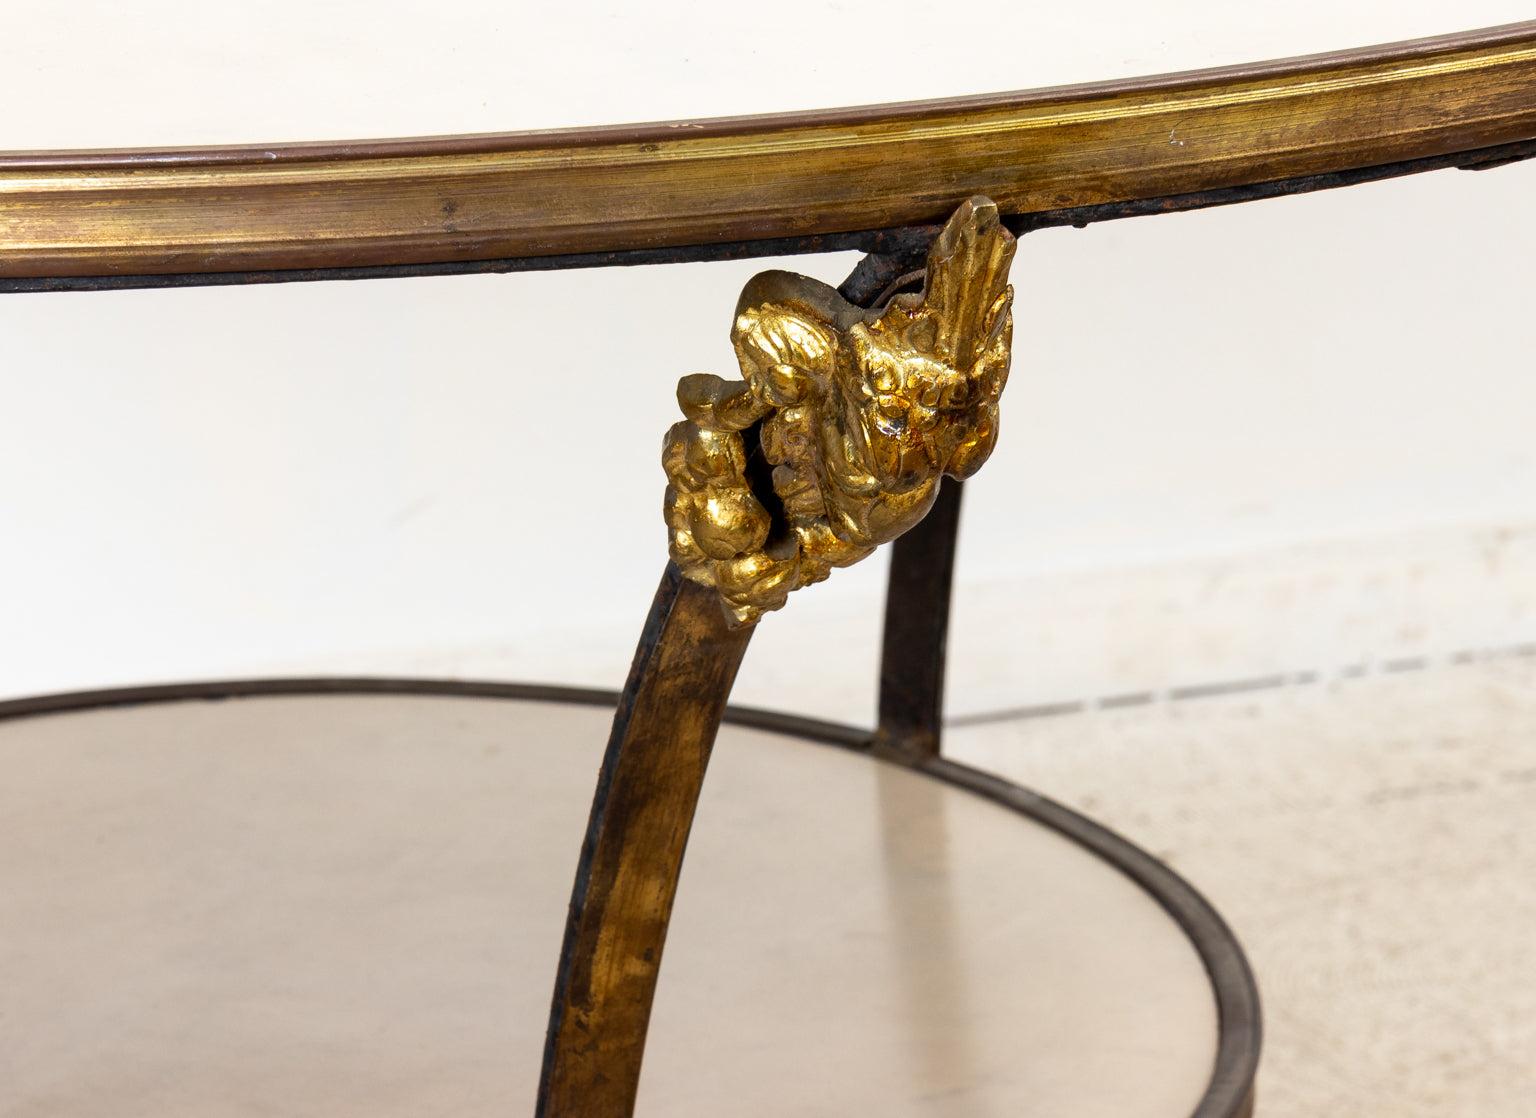 A French 19th century marble and bronze gueridon with ram’s head ormolu ornamentation and hoof form feet. Please note of wear consistent with age.